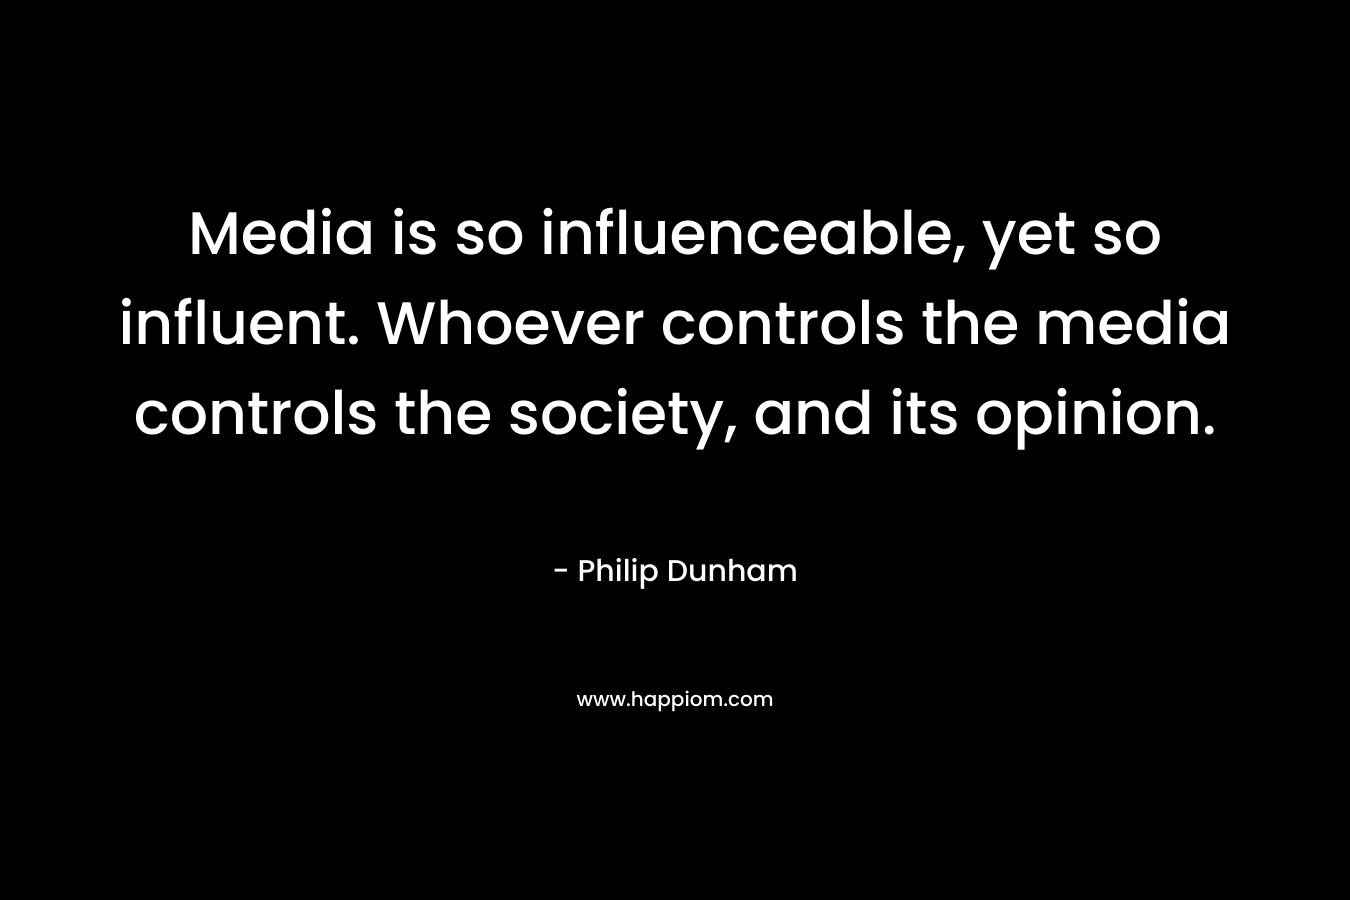 Media is so influenceable, yet so influent. Whoever controls the media controls the society, and its opinion.